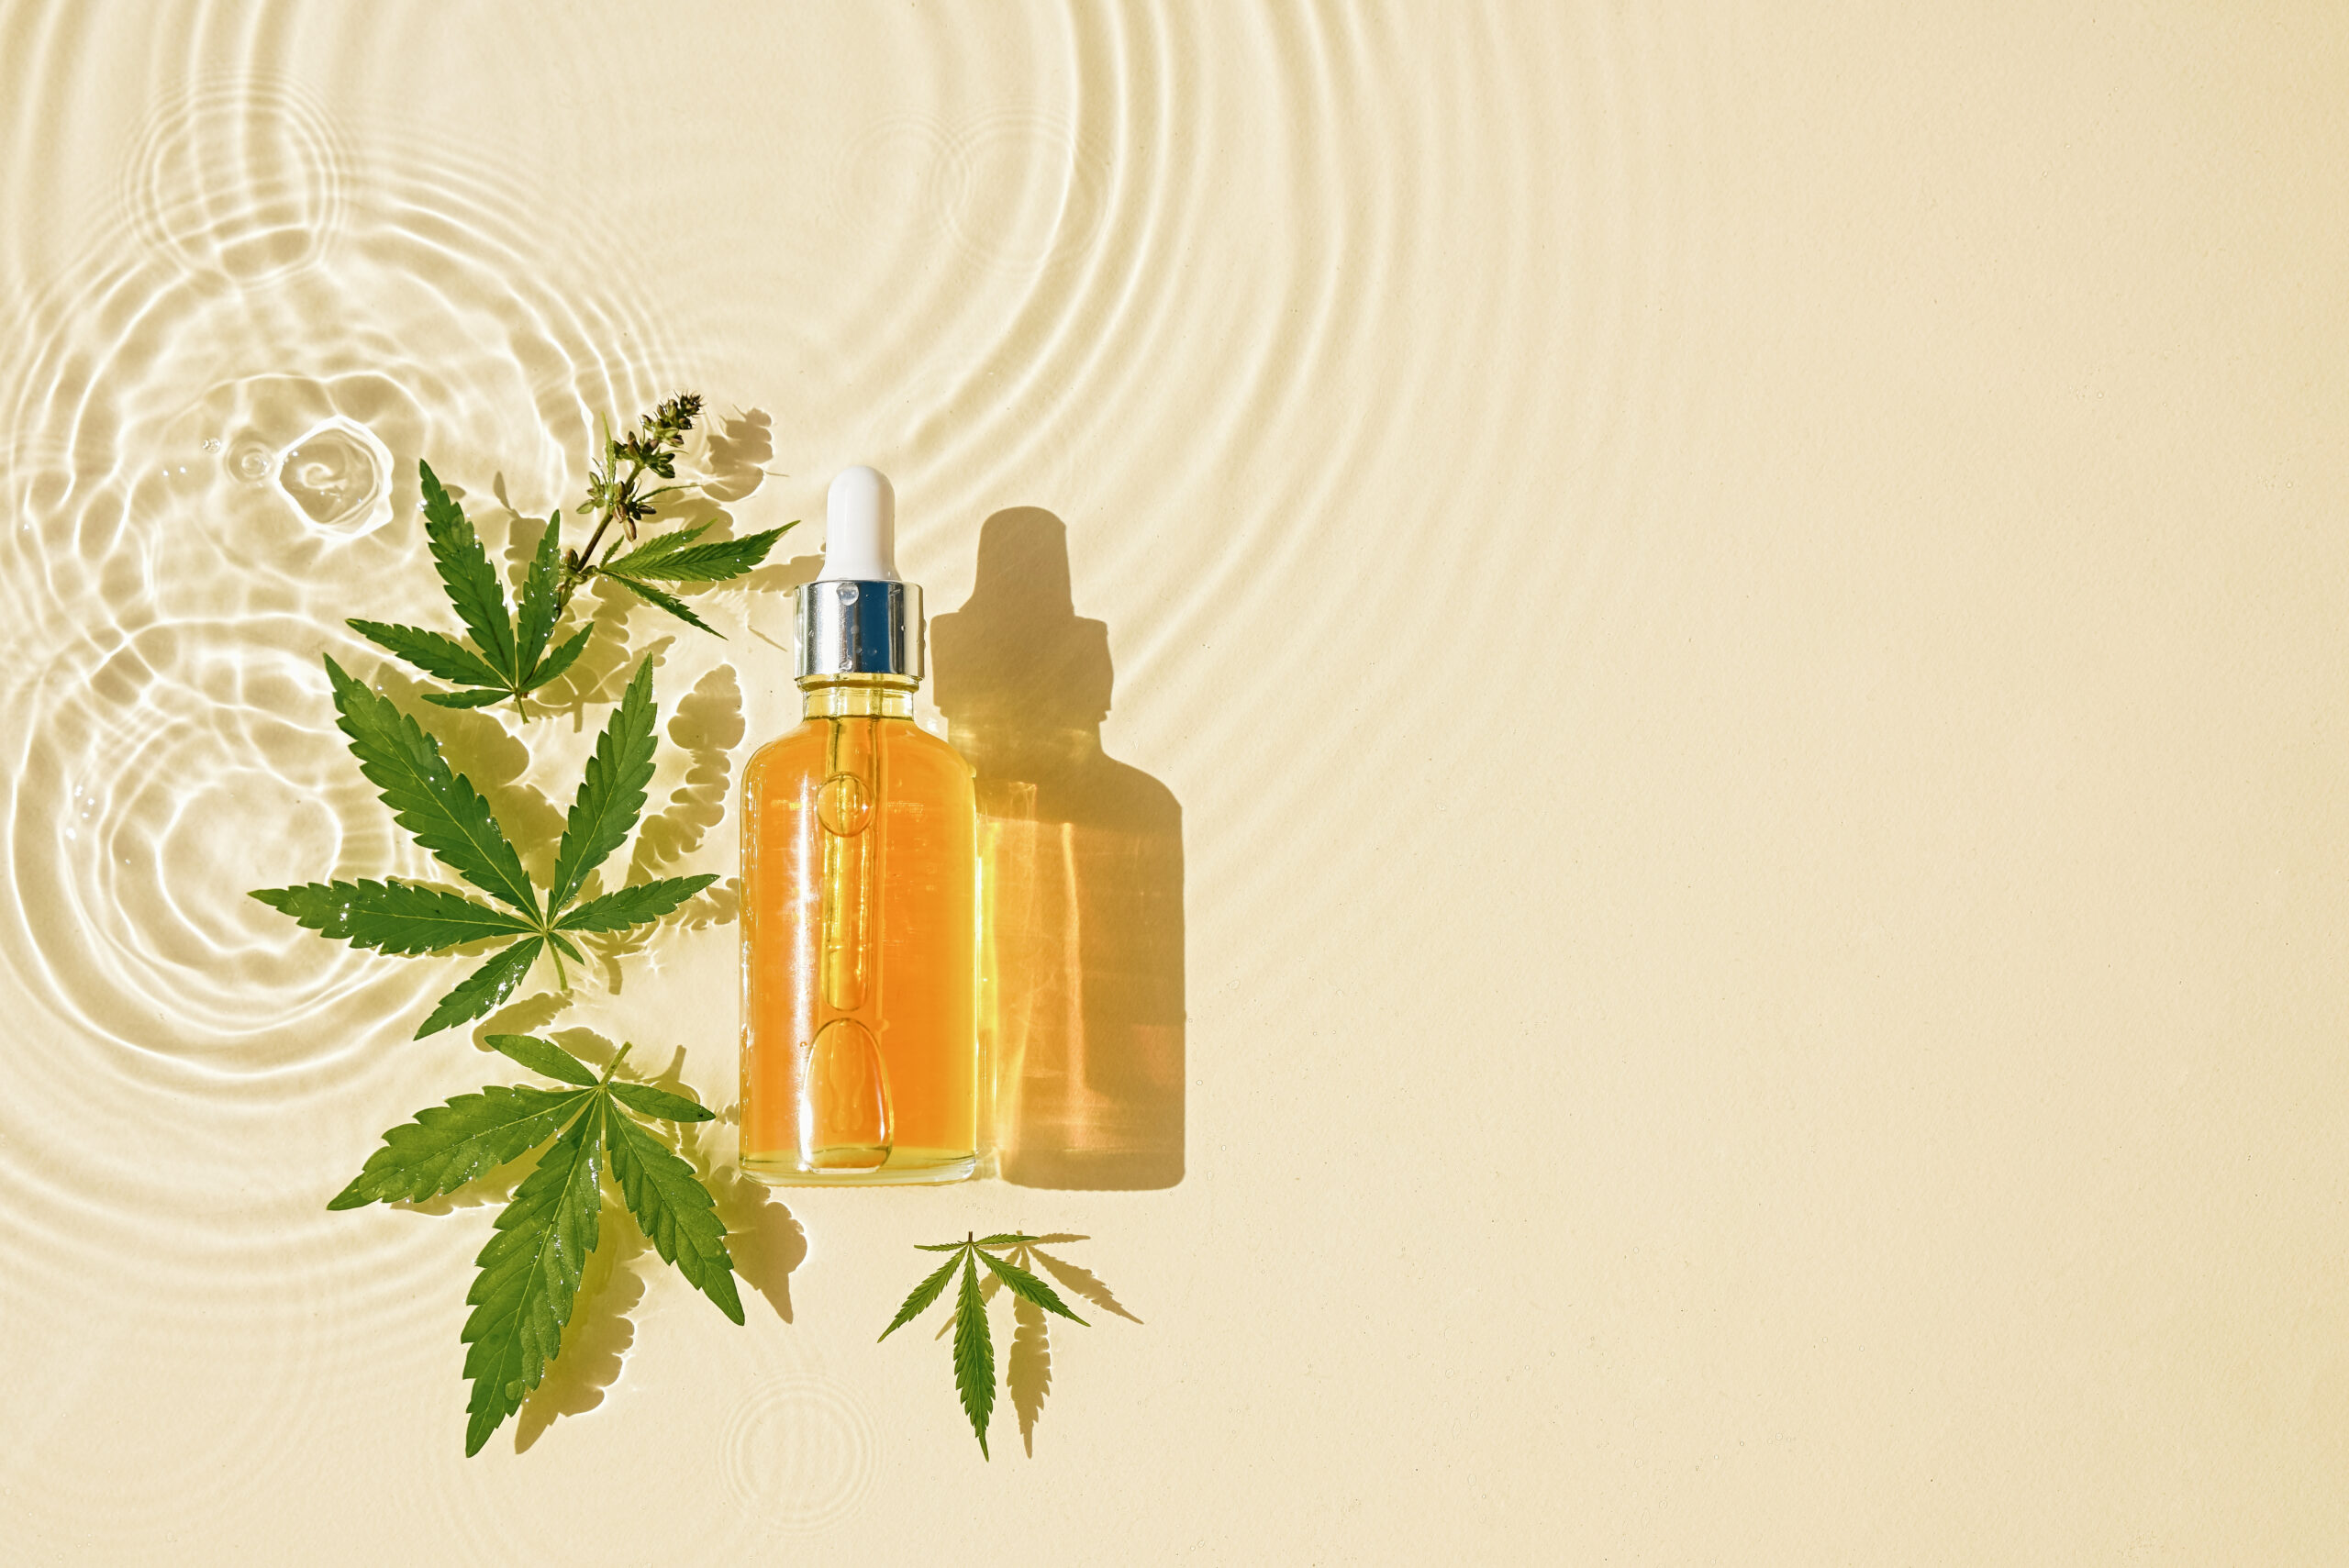 CBD oil in dropper bottle, cannabis leaves, transparent oily background